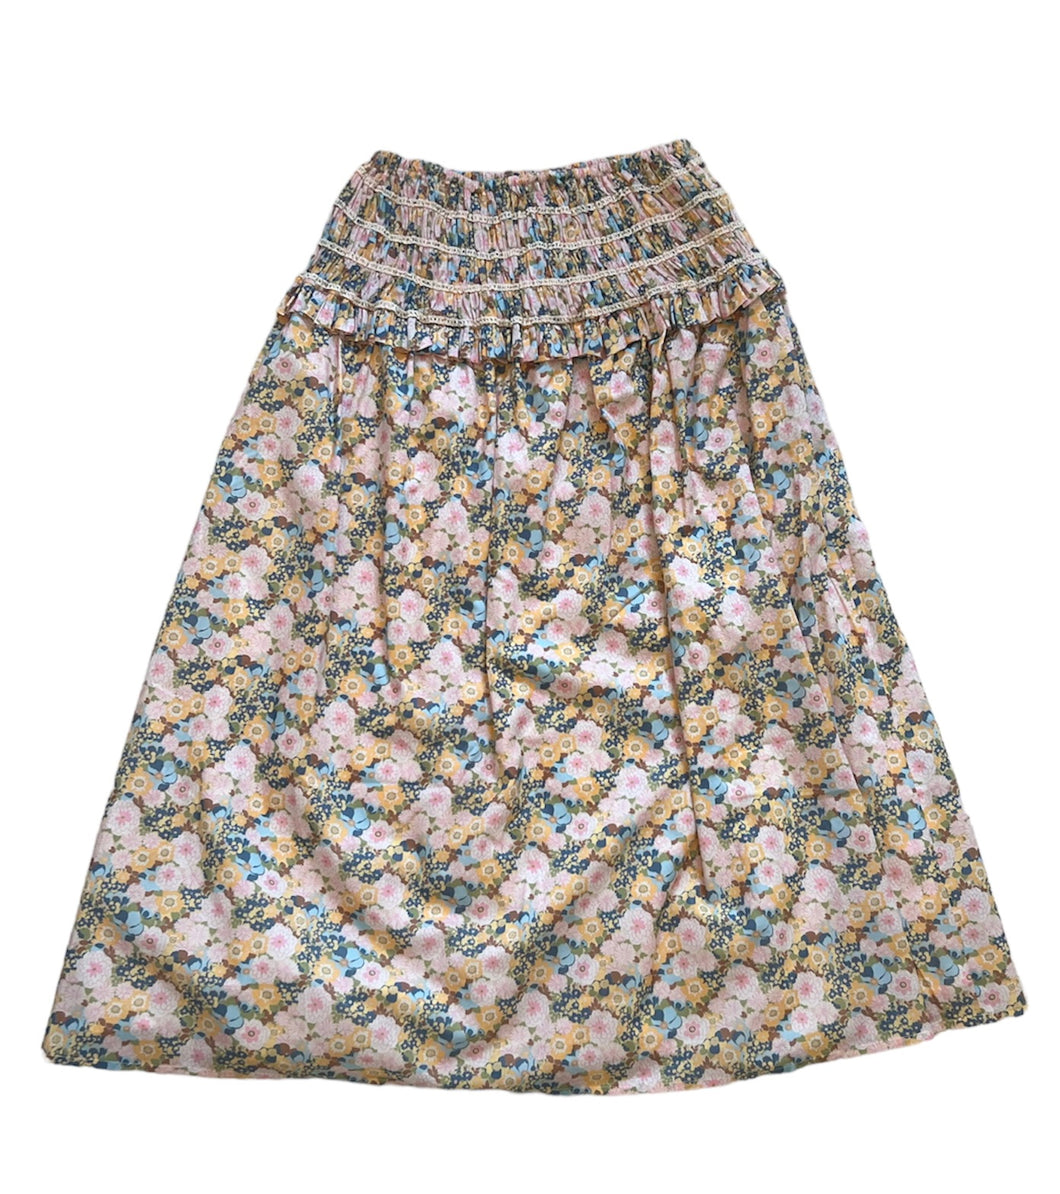 Andion Ingrid Midi Skirt in Yellow Floral